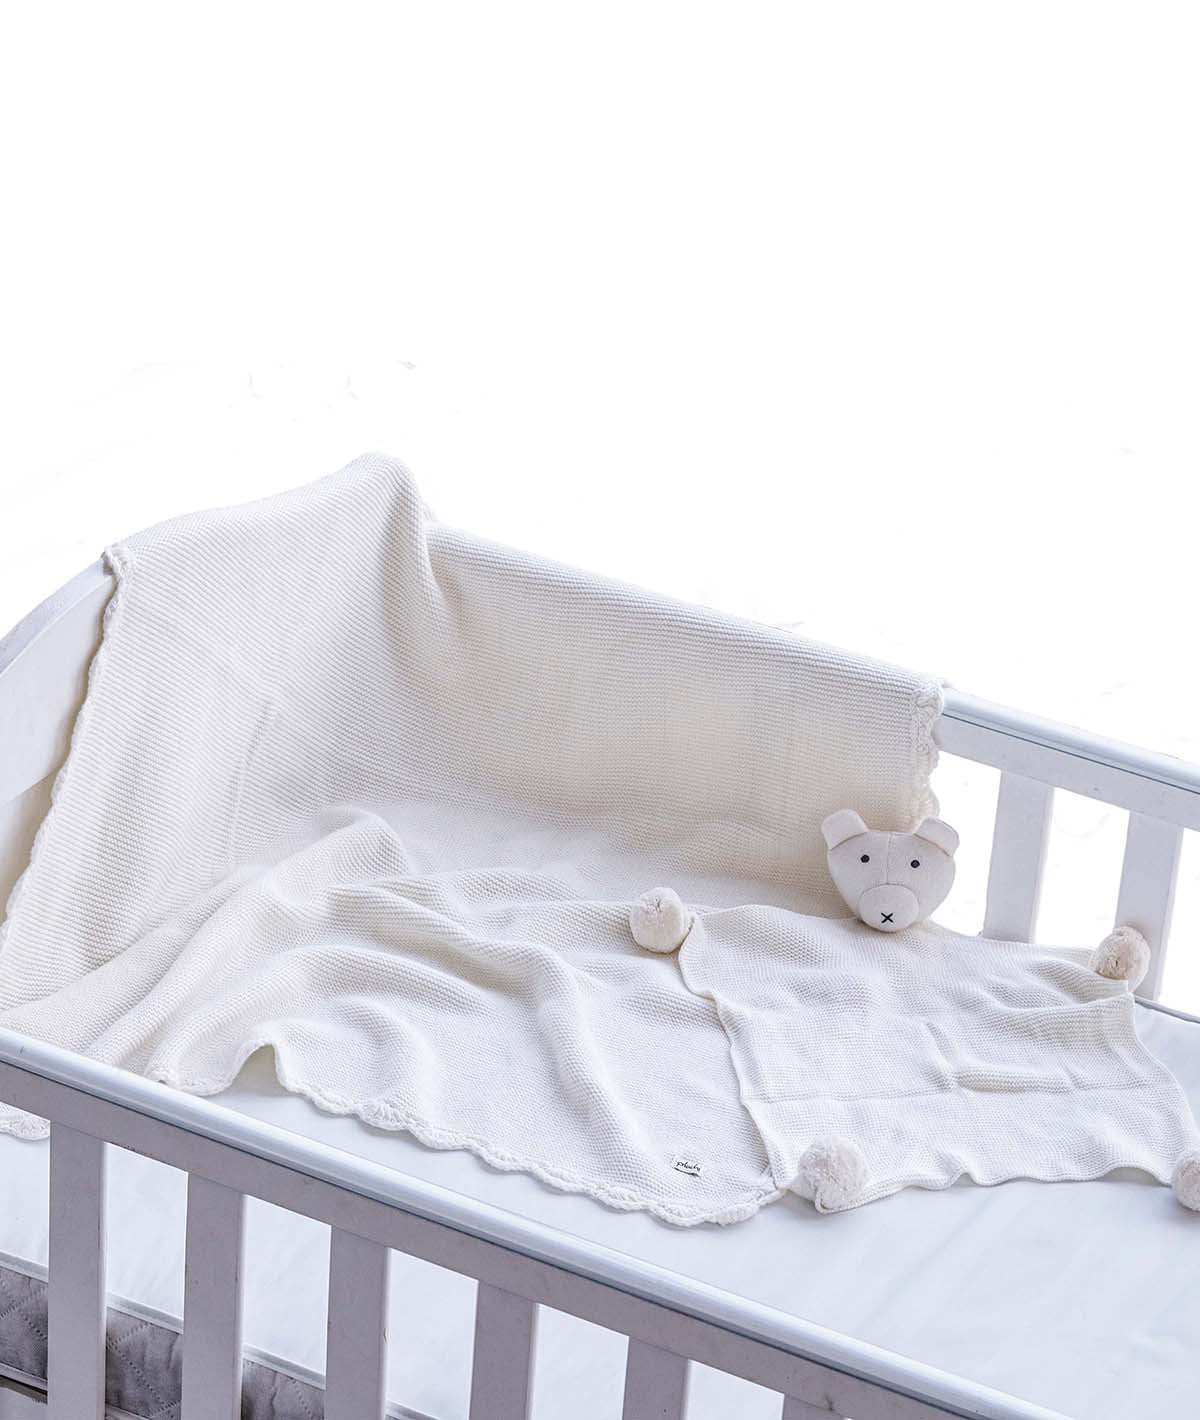 Teddy Bear- Ivory Cotton Knitted All Season AC Blanket with Cuddle Cloth Set for Babies